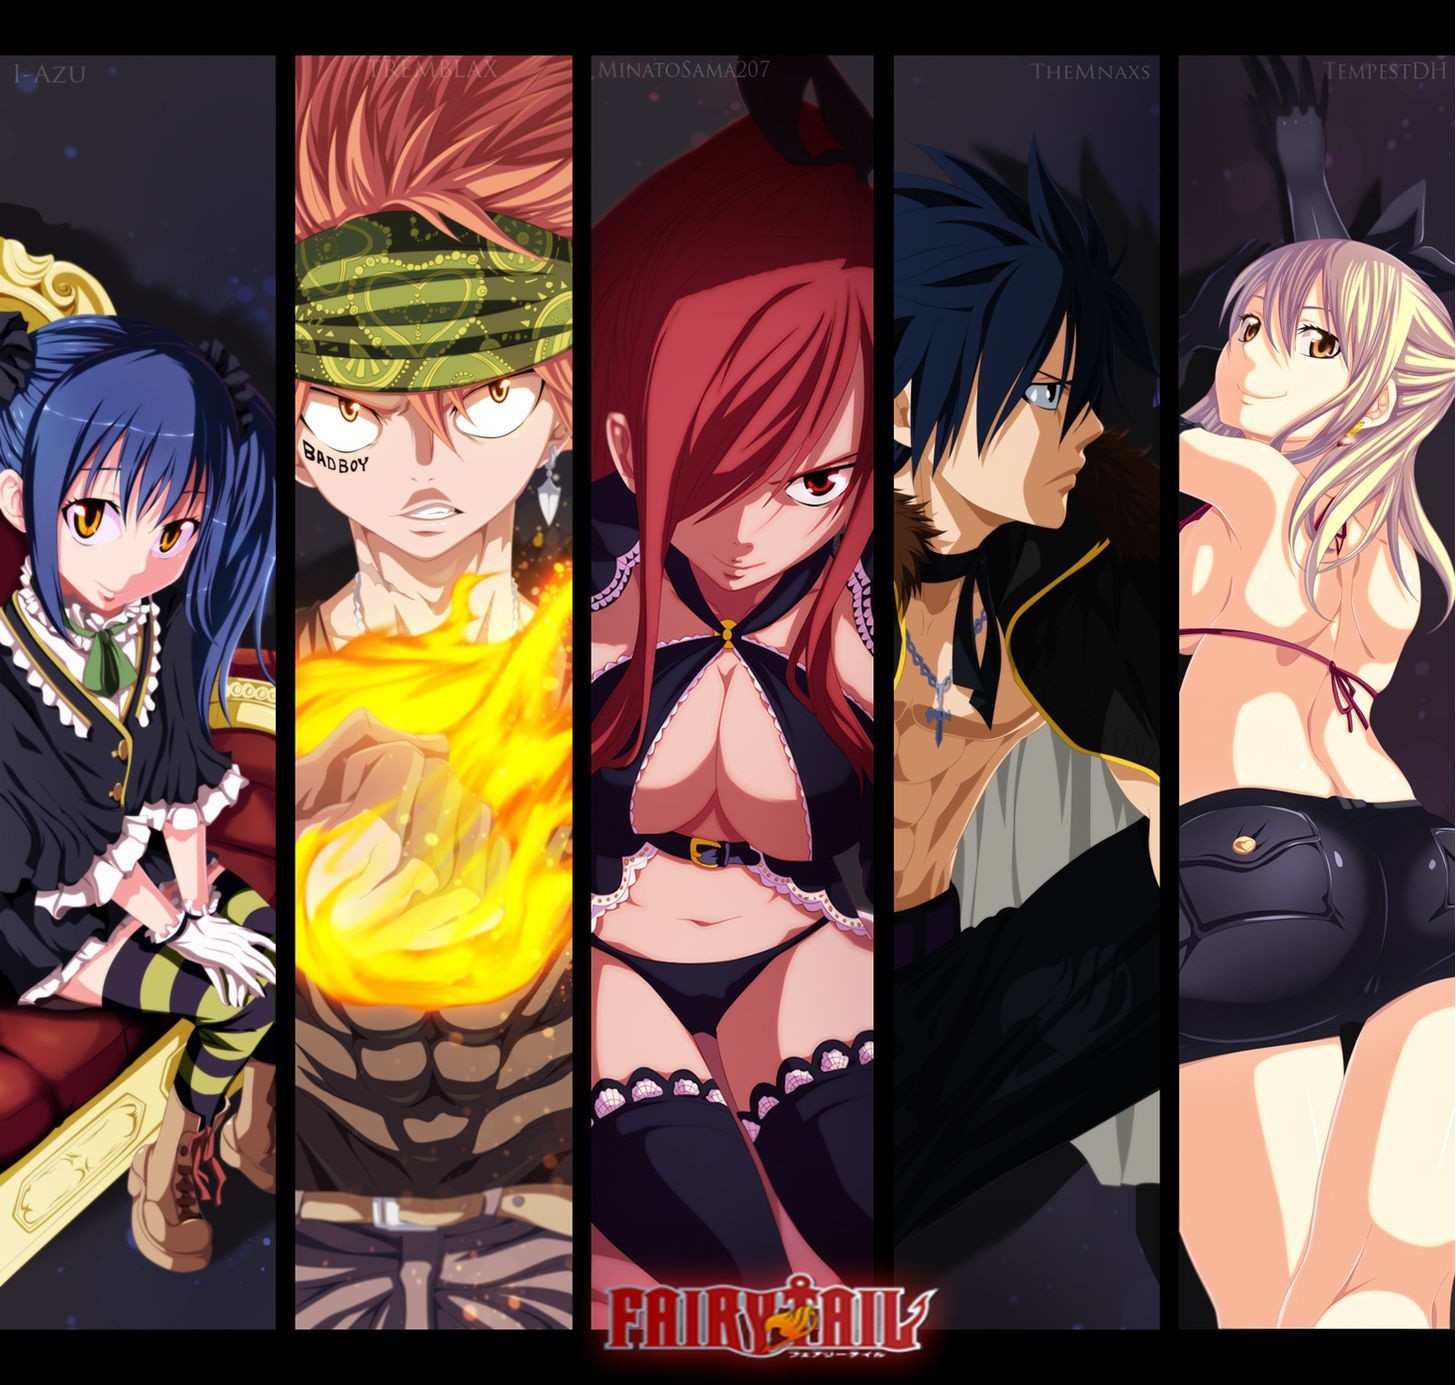 Anime 1456x1385 anime Fairy Tail Dragneel Natsu Heartfilia Lucy  Fullbuster Gray  Scarlet Erza Marvell Wendy  collage big boobs anime girls boobs